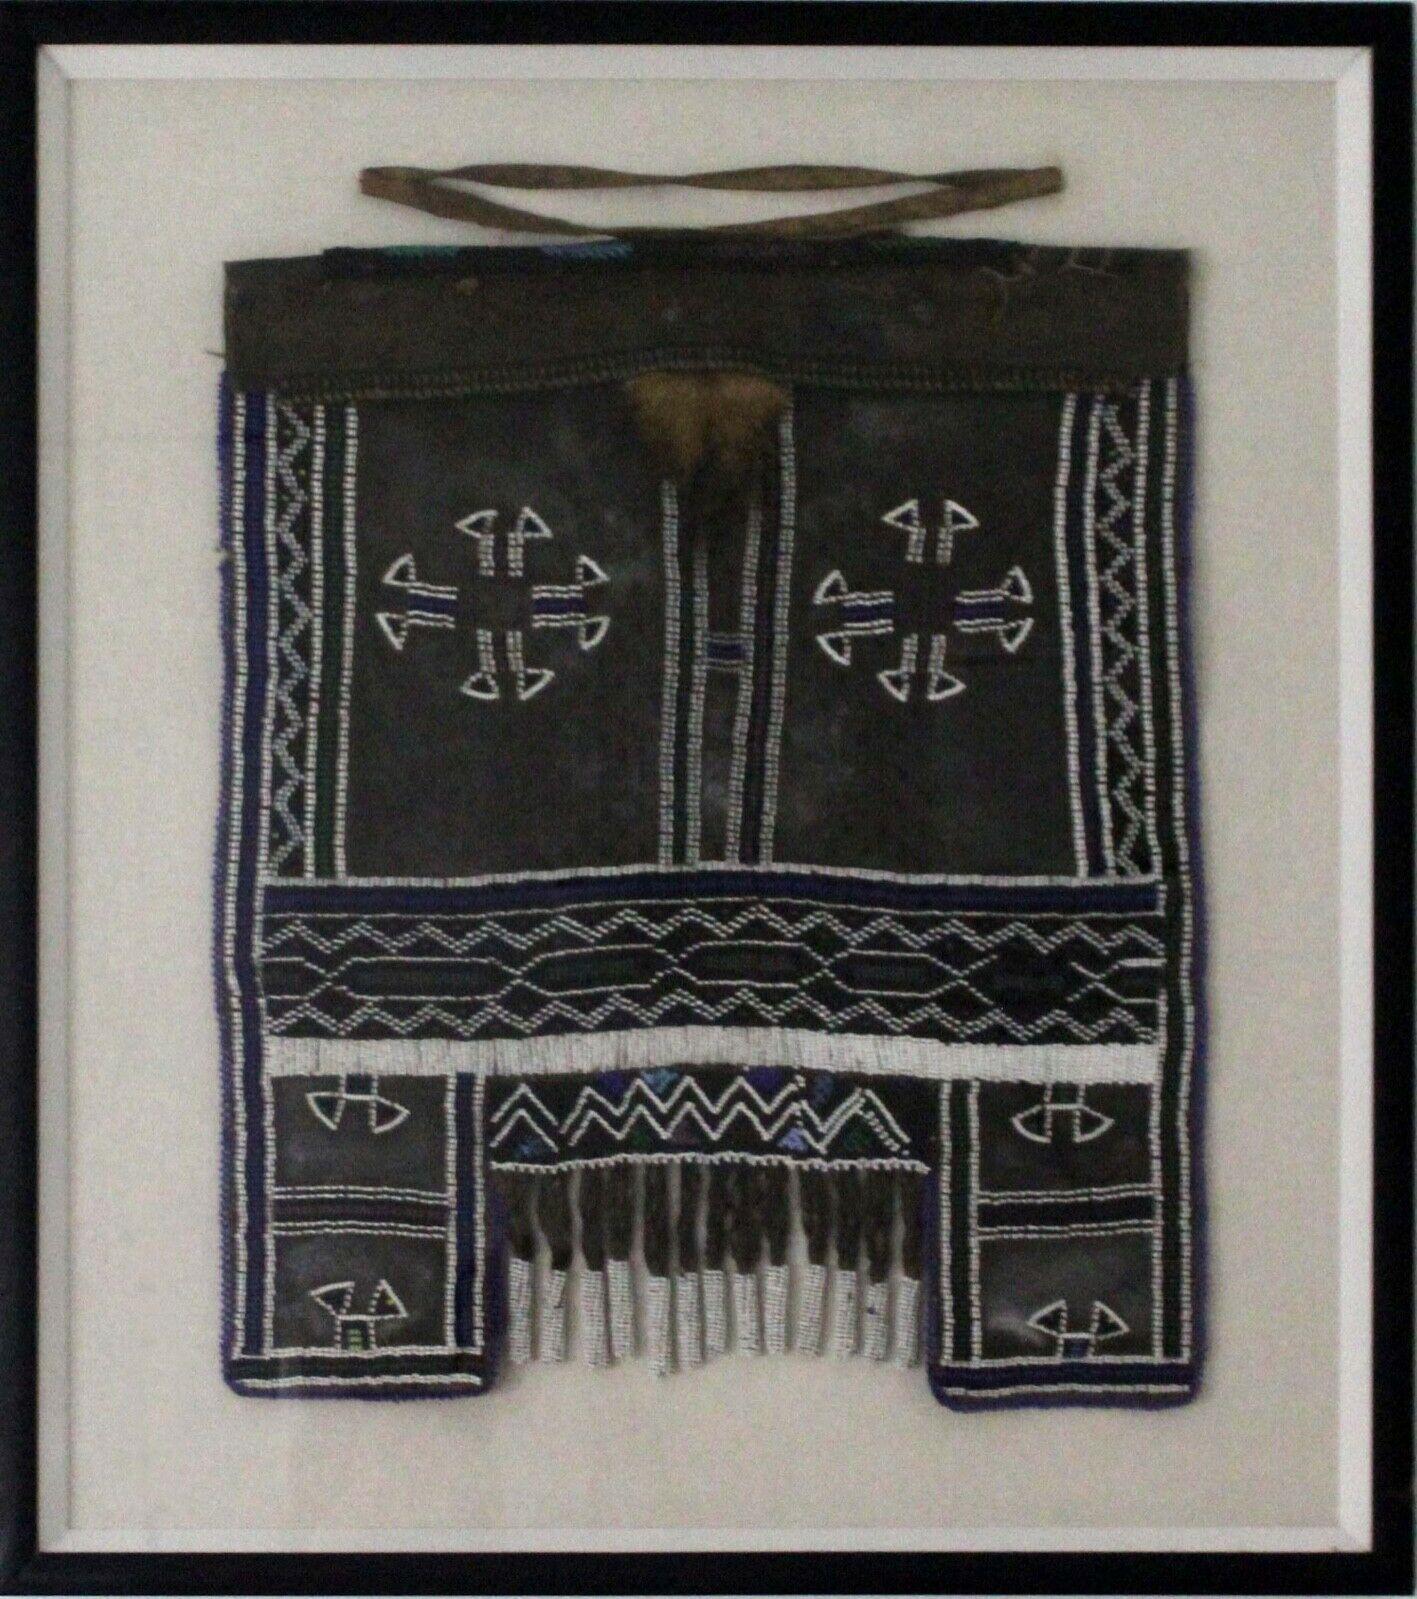 African Ndebele Mapoto Beaded Apron set of two. Great Vintage pieces to add to your collection. Beautifully show cased in custom framing. 


Dimensions:
Dark Apron: 26.75w x 1.25d x 30h
Light Apron: 27w x 1.25d x 29.75h.